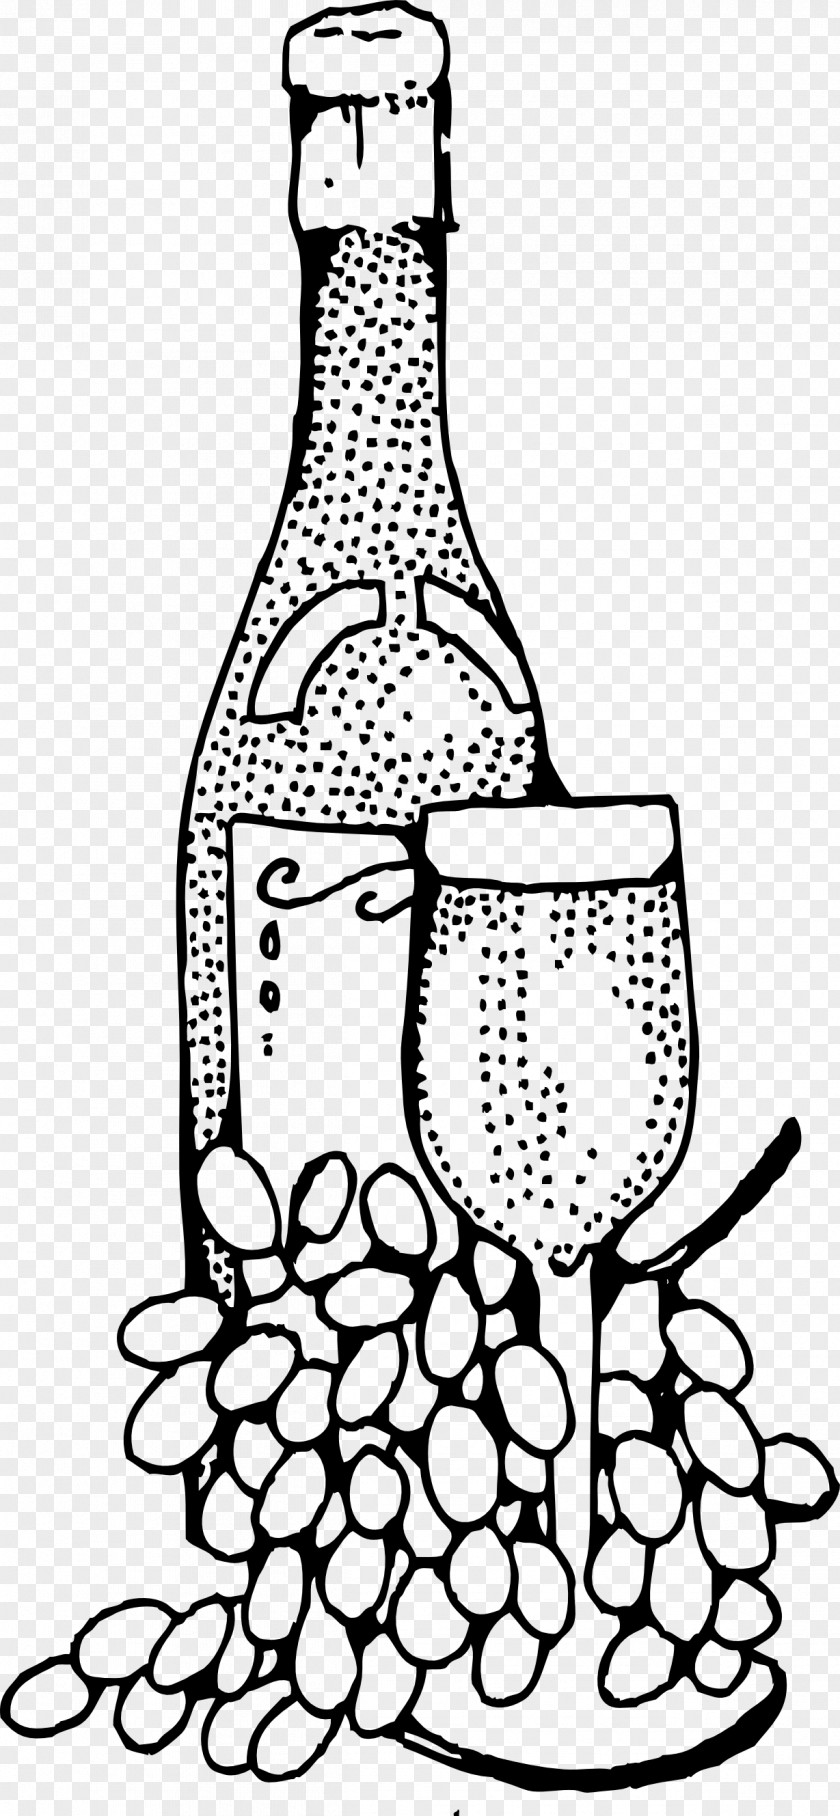 Wine Bottle Ready-to-Use Food And Drink Spot Illustrations Clip Art PNG